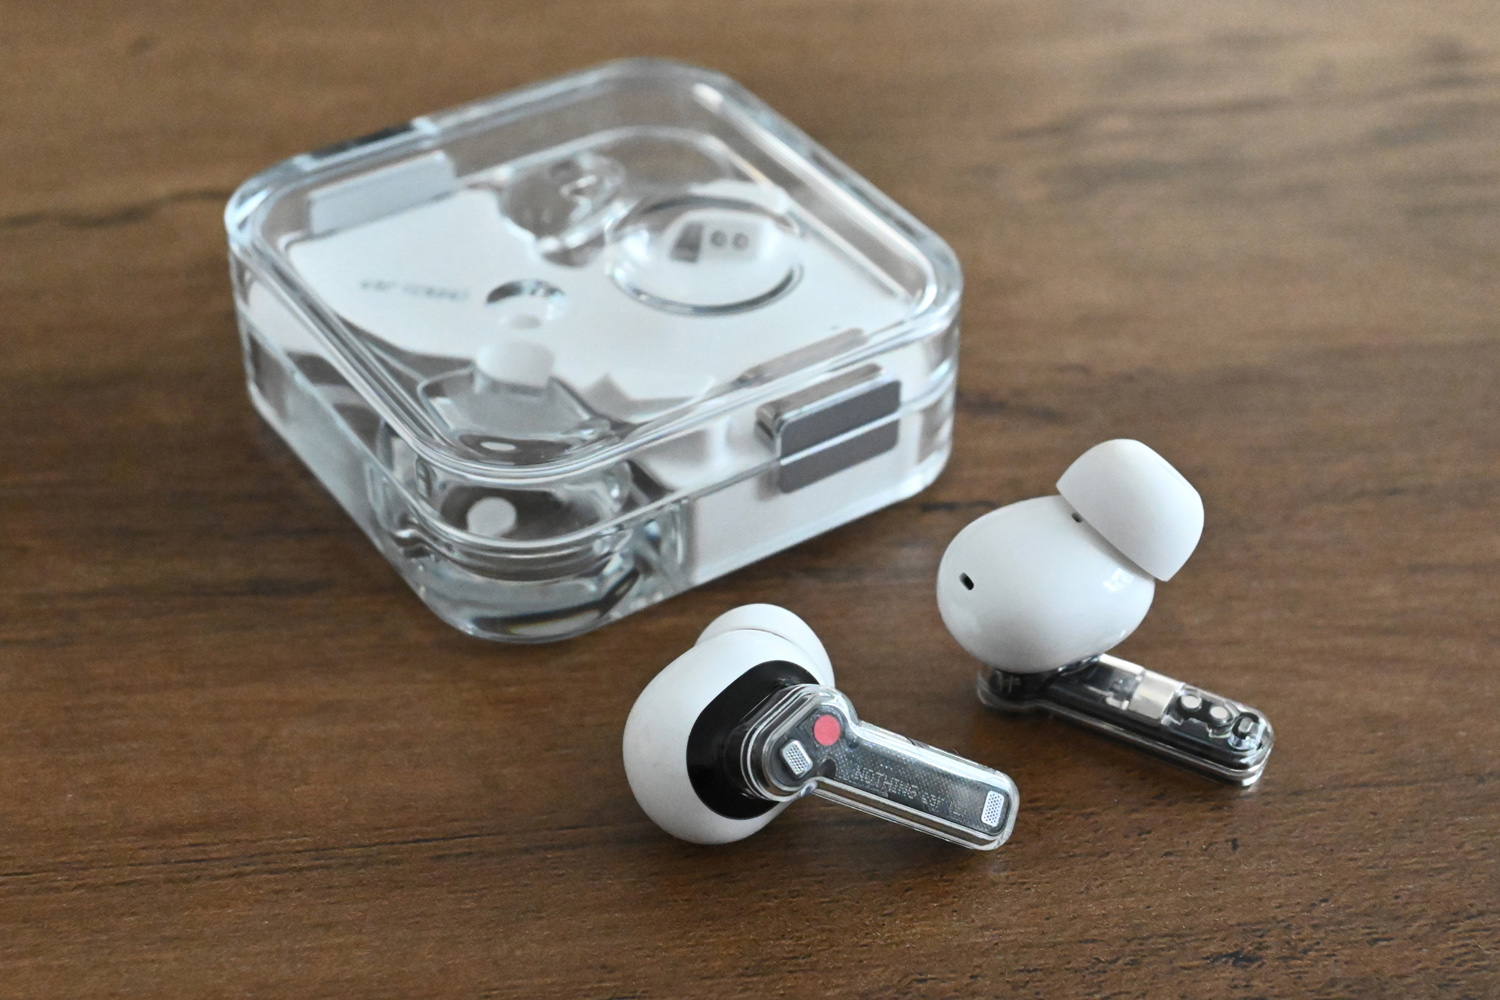 Nothing Ear 2 review: see-through sequel | Stuff